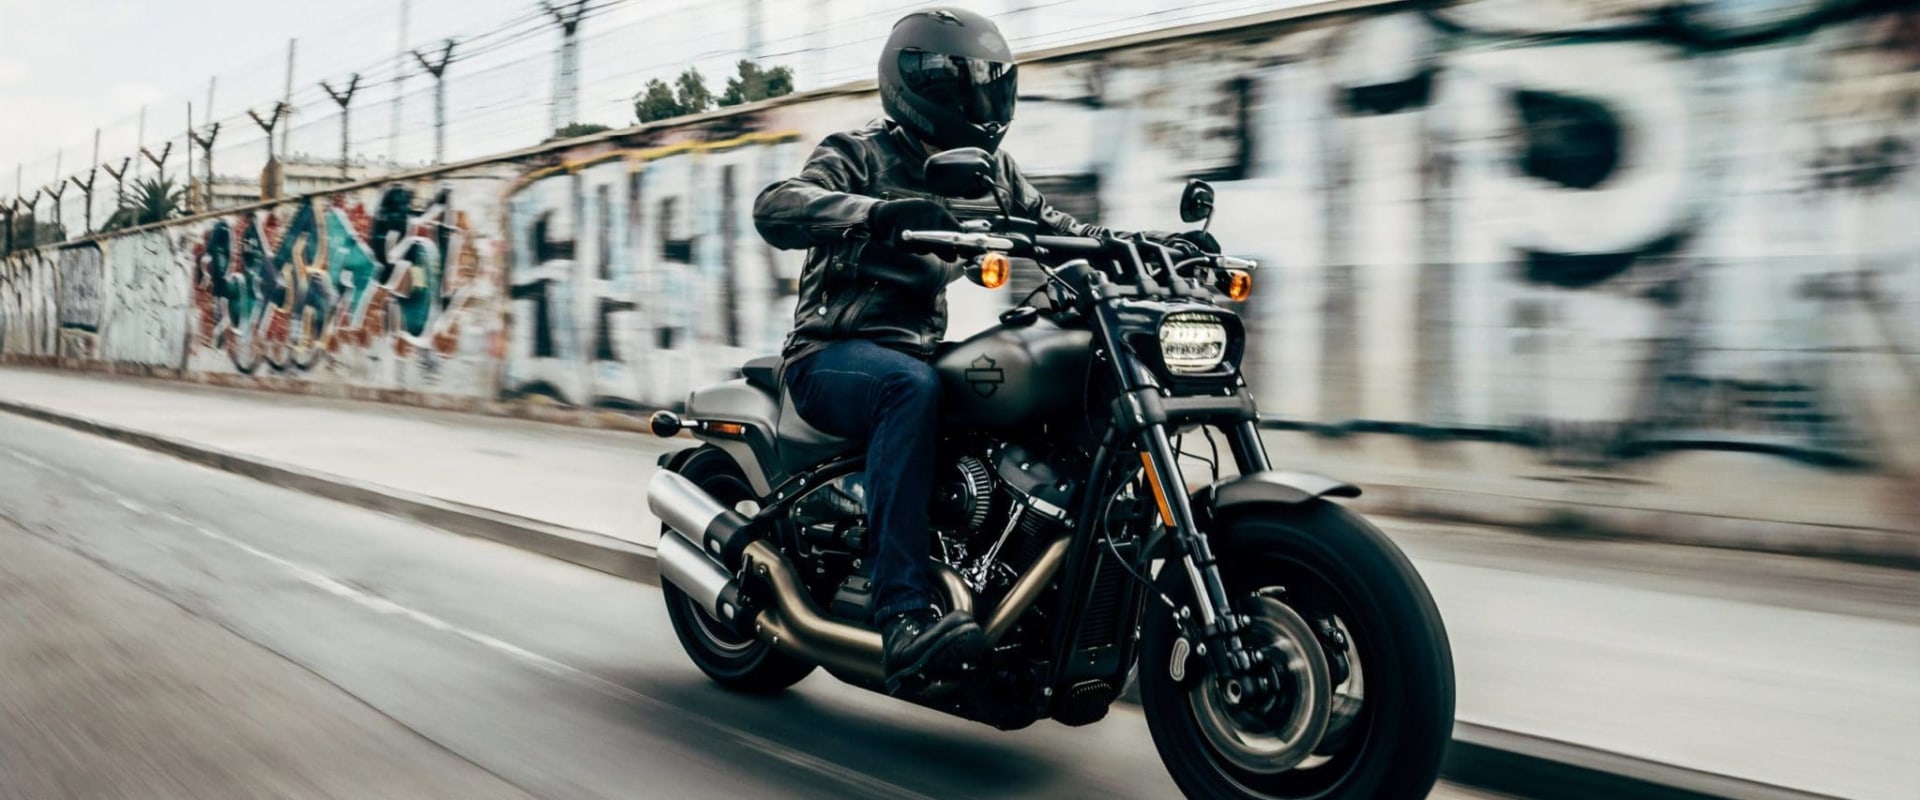 Choosing the Right Gear for Motorcyclists